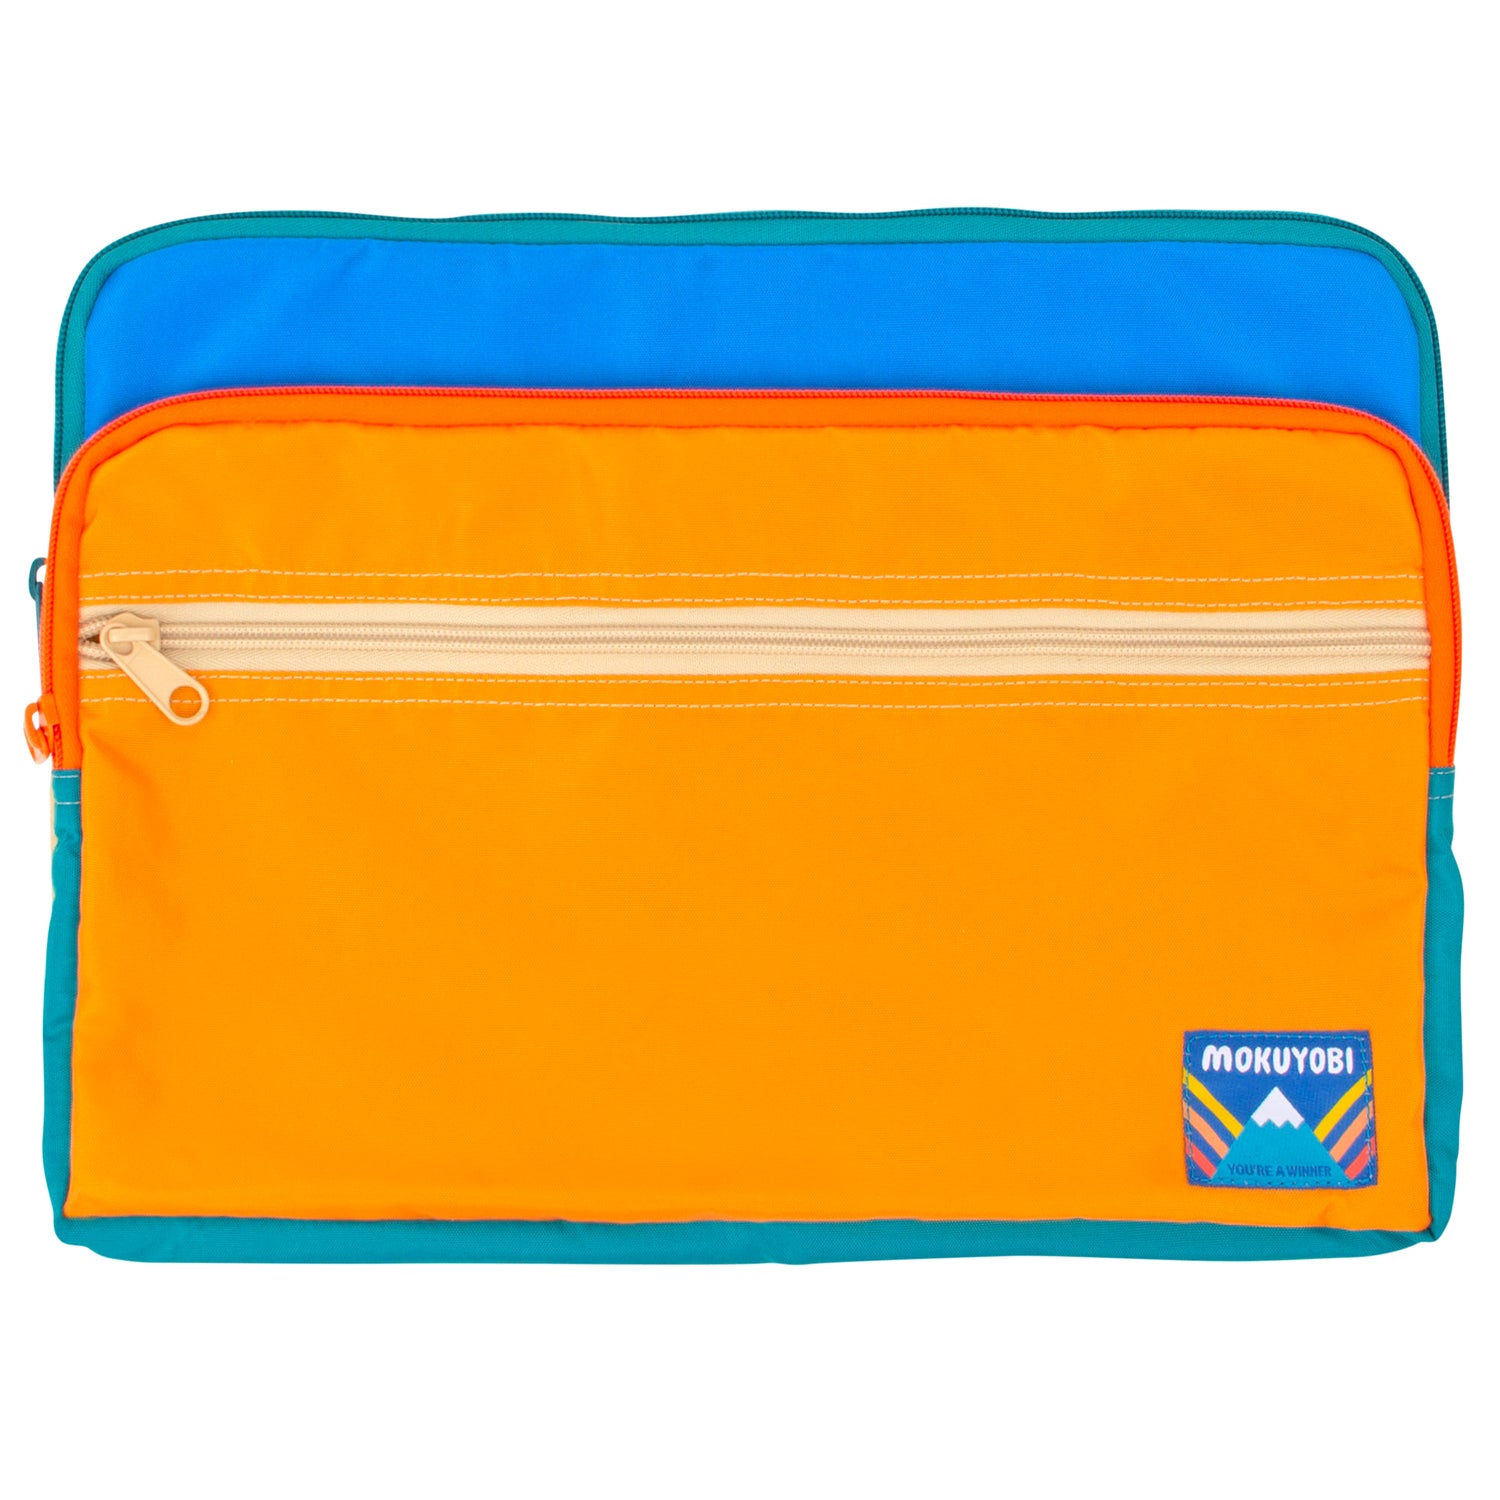 A colorful laptop case with zipper pockets